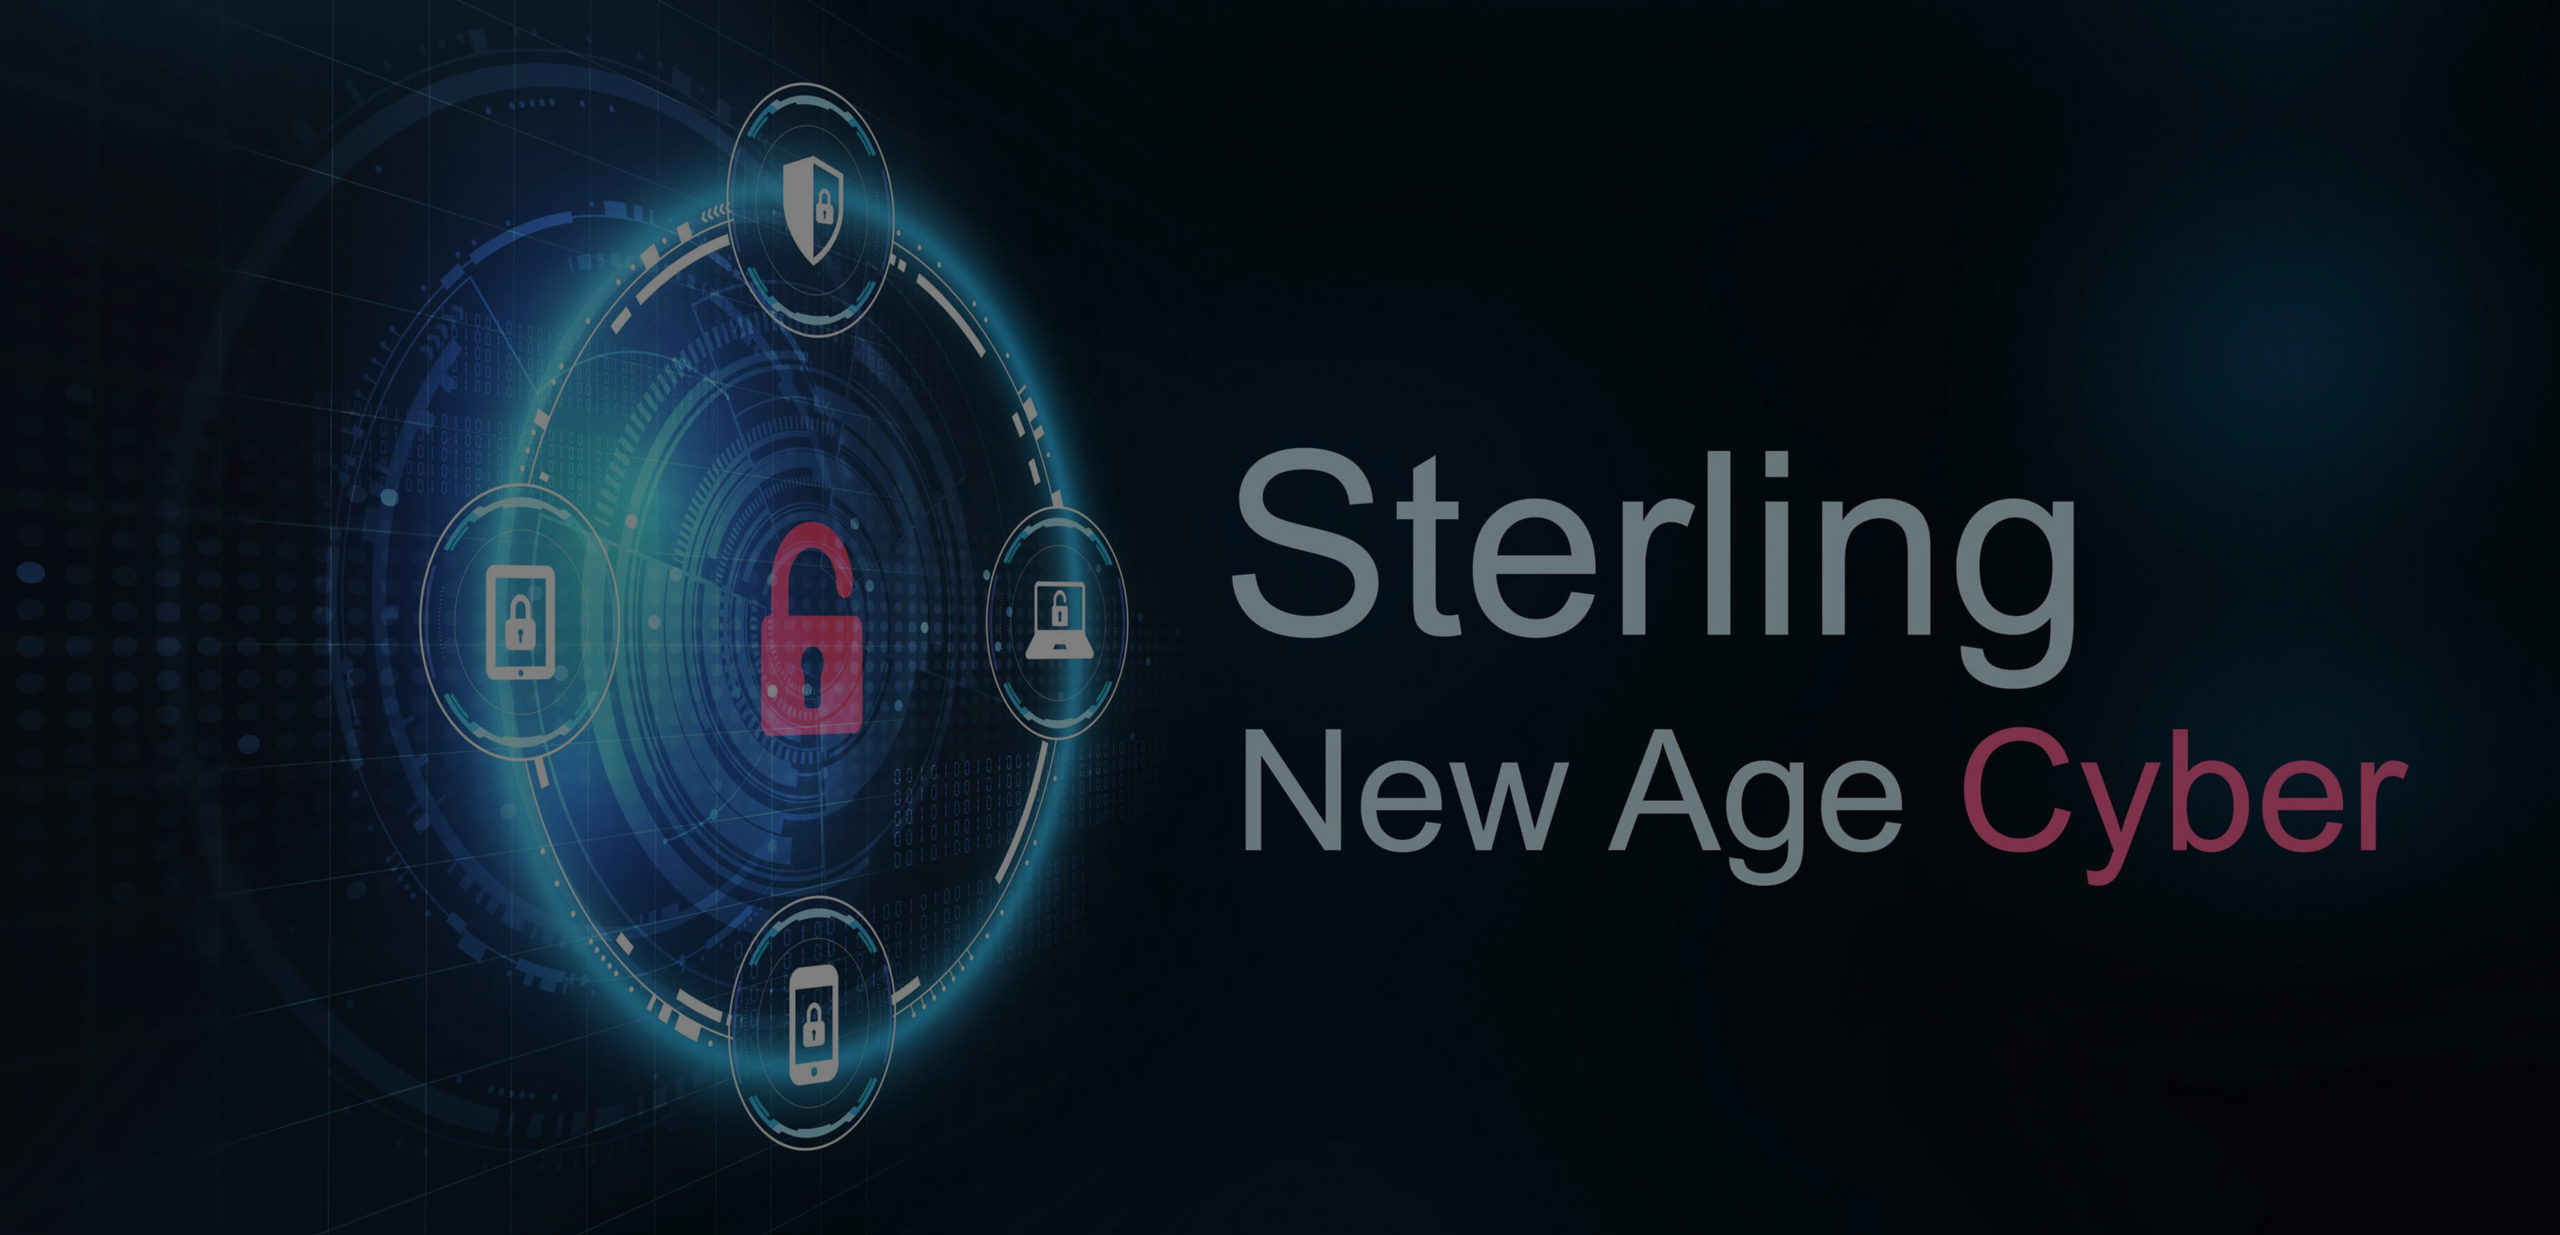 Elpha Secure and Sterling New Age Cyber Launch ES-1000, an All-Inclusive, Complimentary Cyber Security Insurance Package